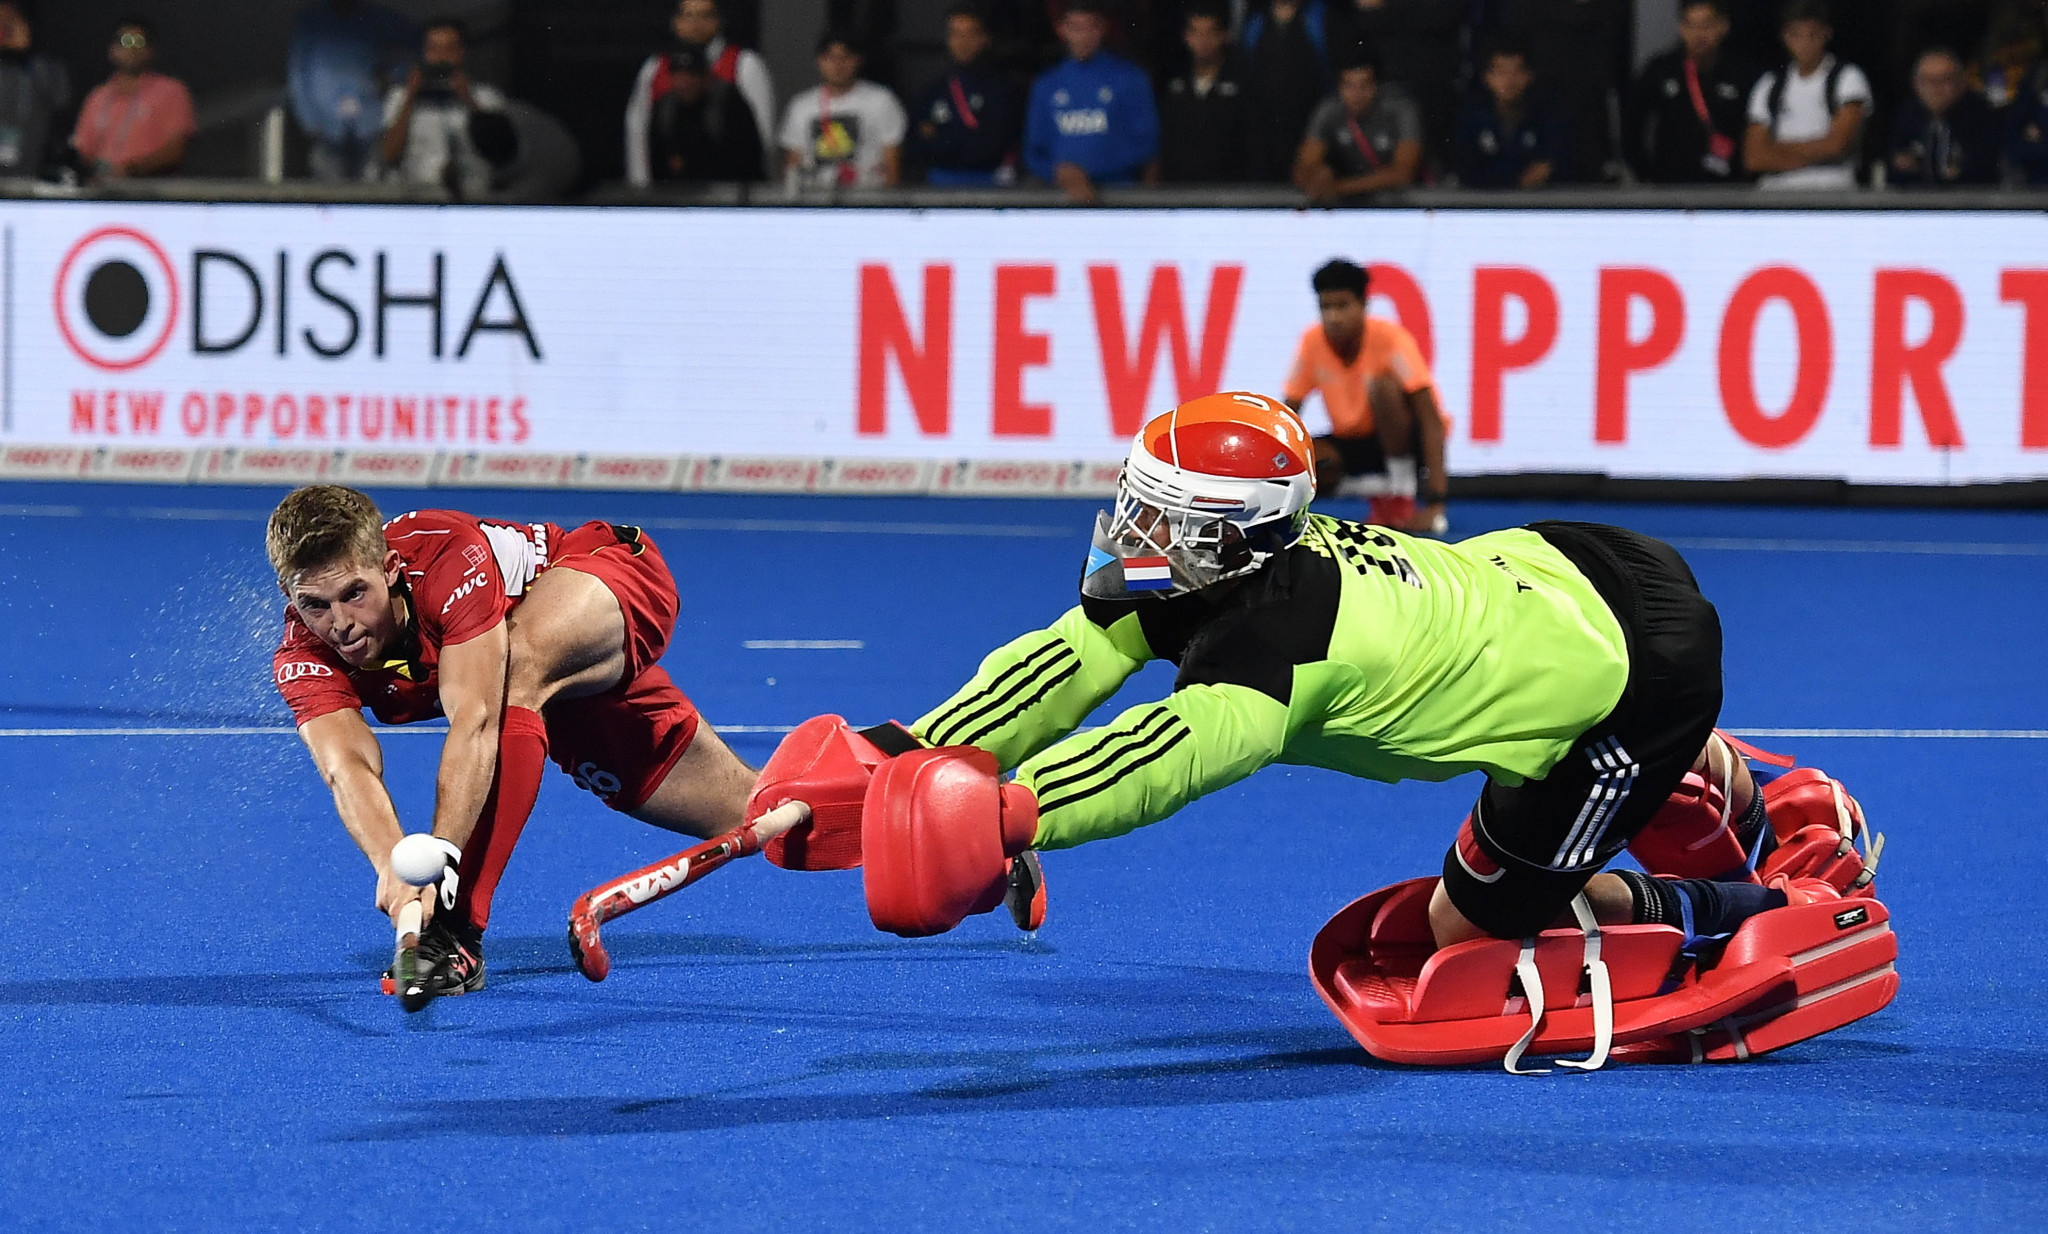 The International Hockey Federation has announced two potential time windows for the 2022 Men's and Women's World Cups ©Getty Images